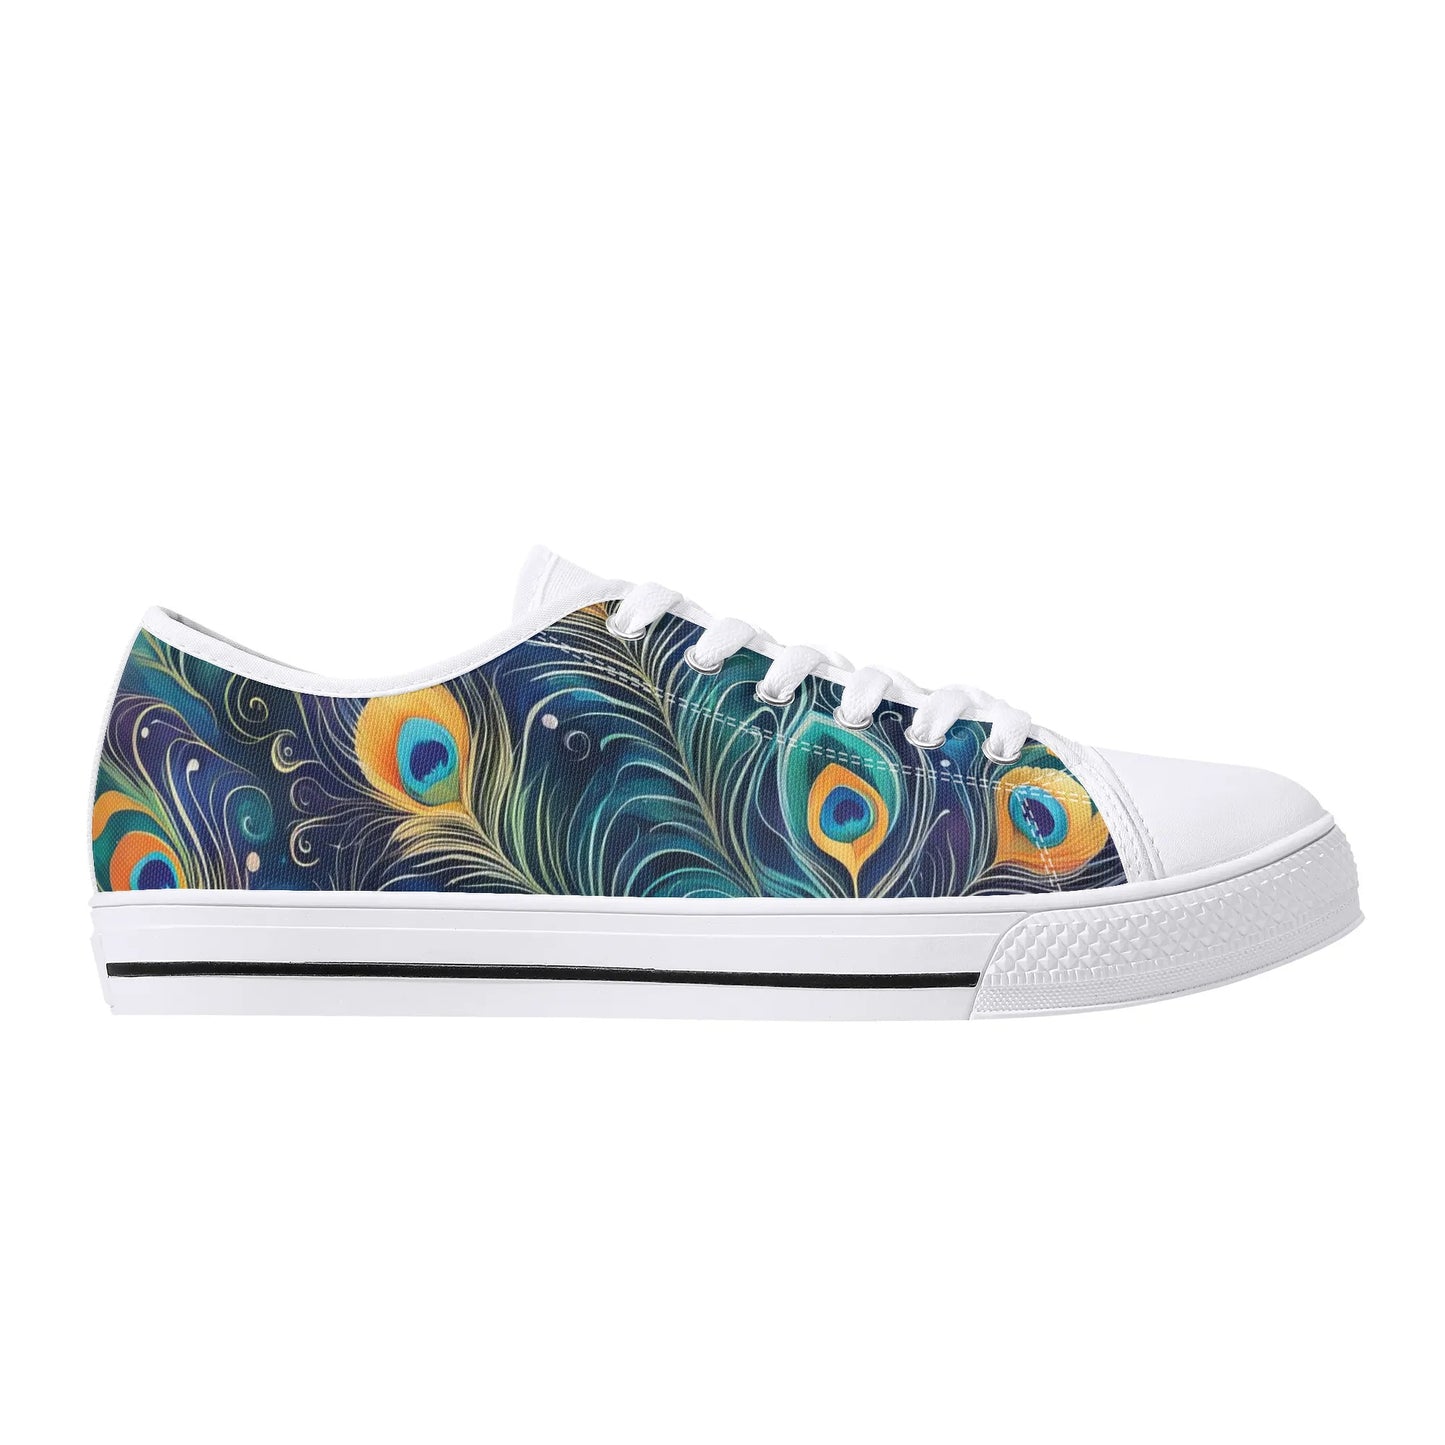 Blue Peacock Feathers Womens Rubber Low Top Sneakers